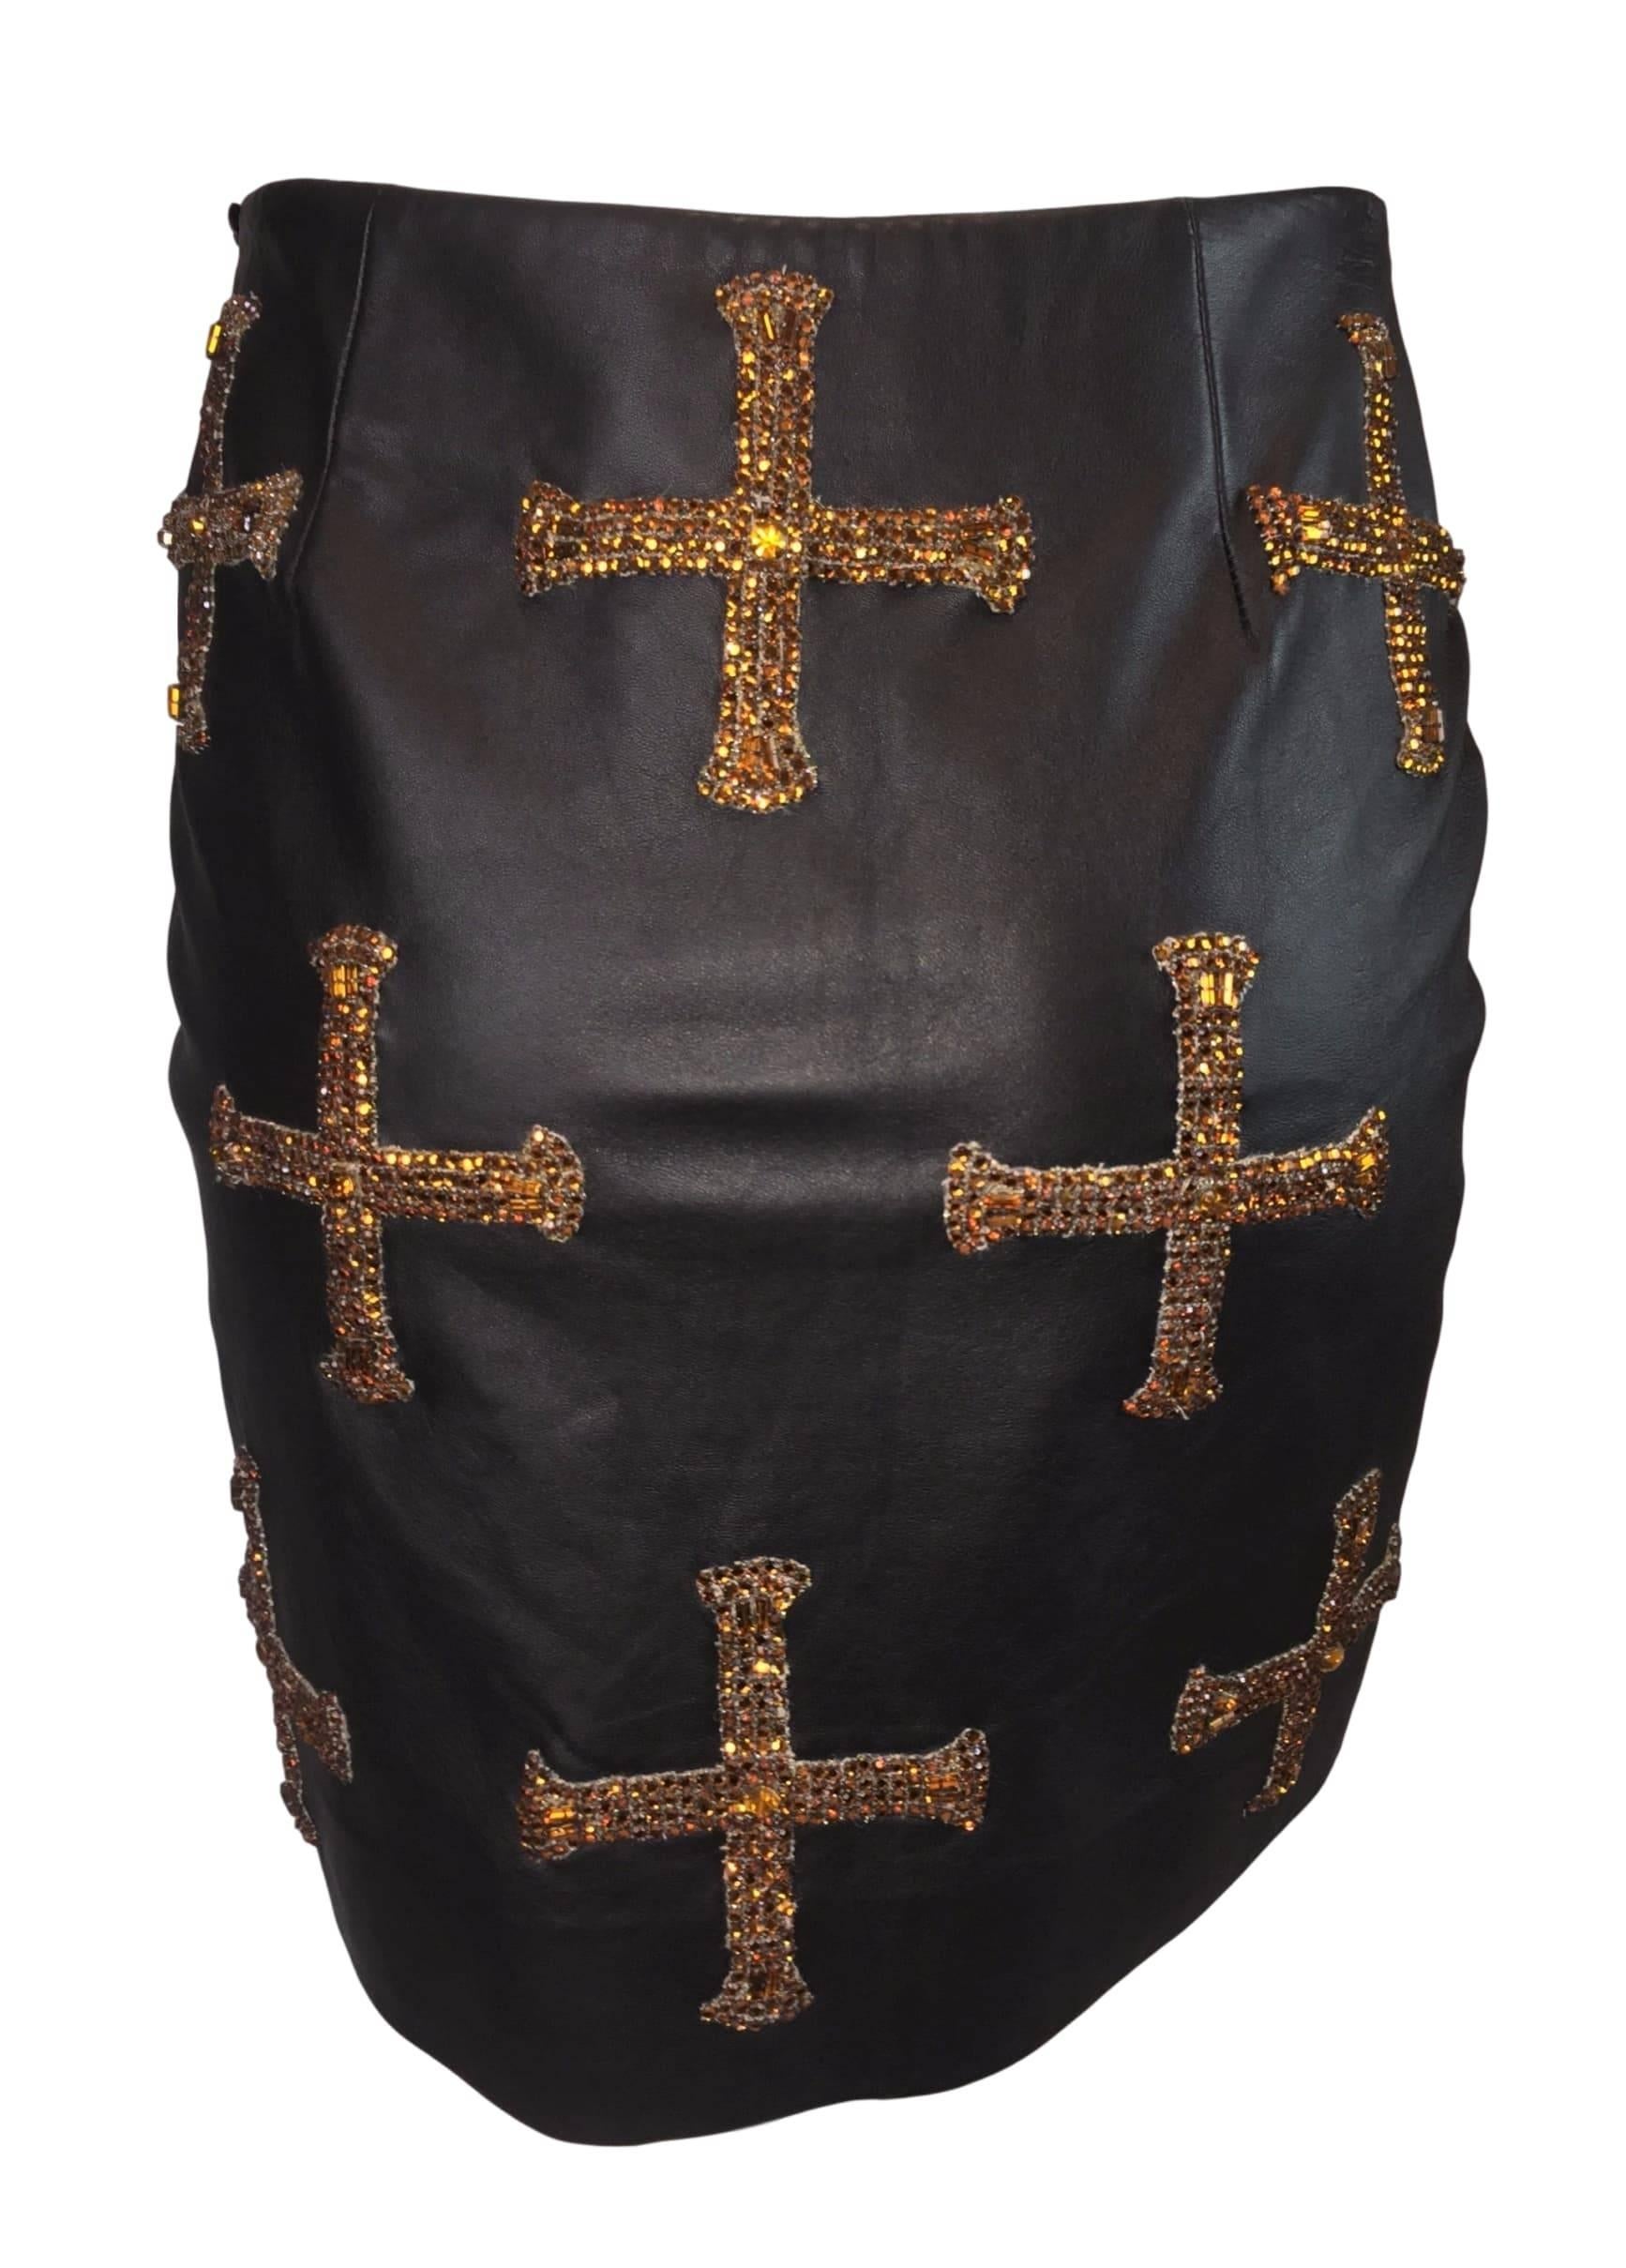 DESIGNER: F/W 1997 Atelier Versace by Gianni Versace- shown on the runway in brown with Versace letters and in dress form. 

Please contact for more information and/or photos.

CONDITION: Good no flaws

MATERIAL: Leather lined in silk

COUNTRY MADE: